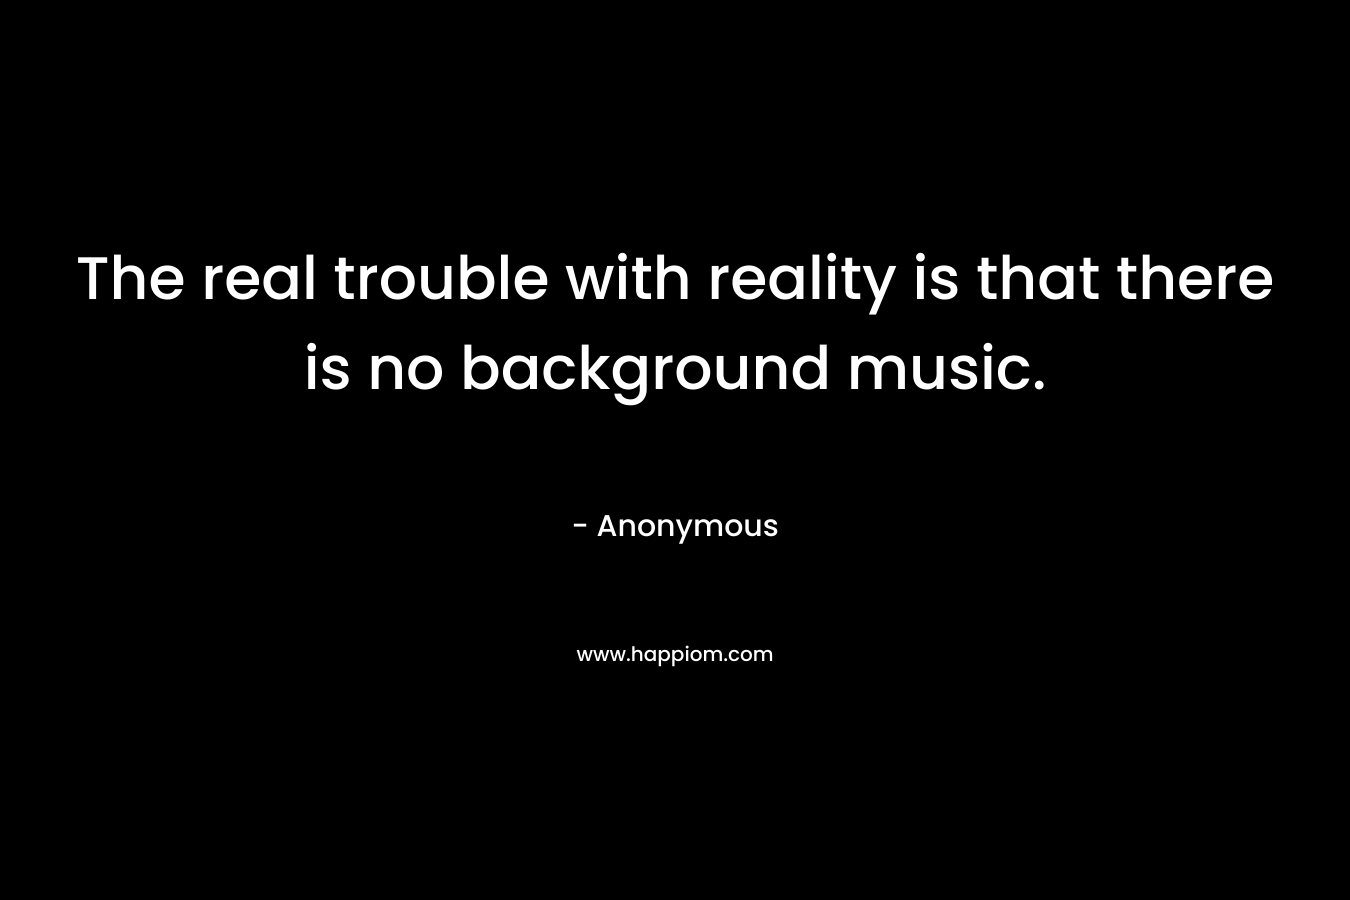 The real trouble with reality is that there is no background music.